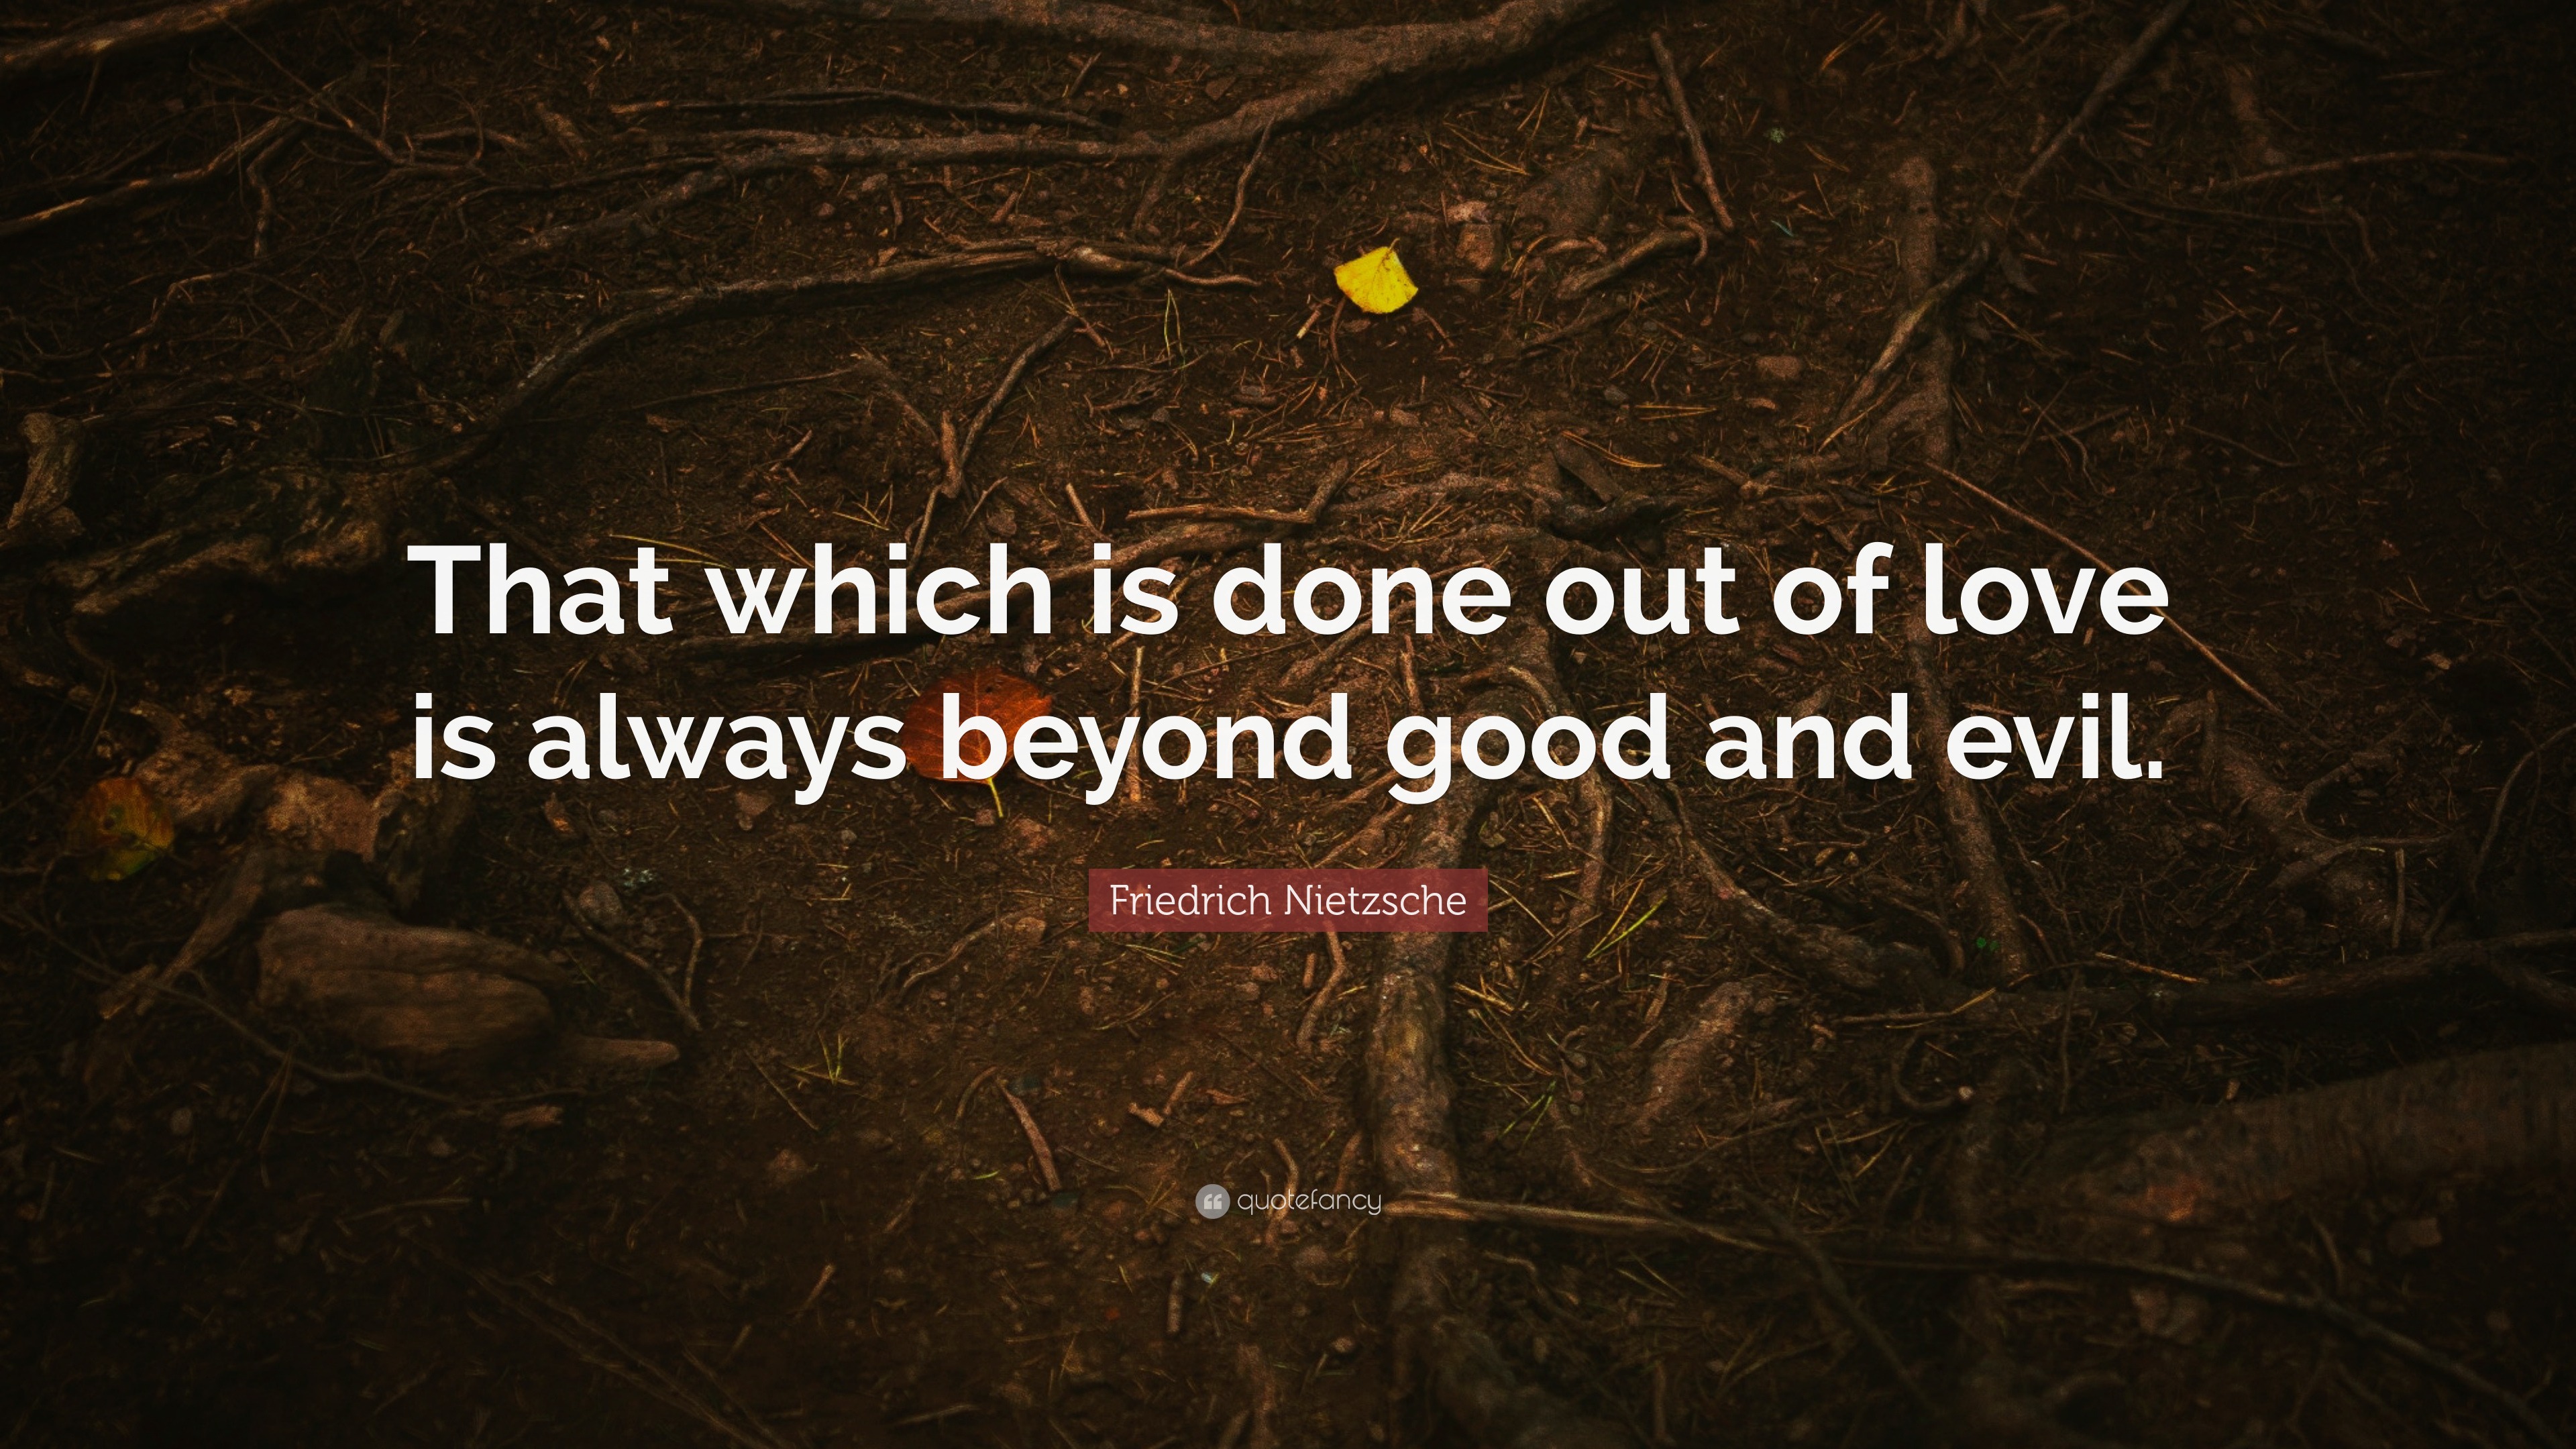 Friedrich Nietzsche Quote “That which is done out of love is always